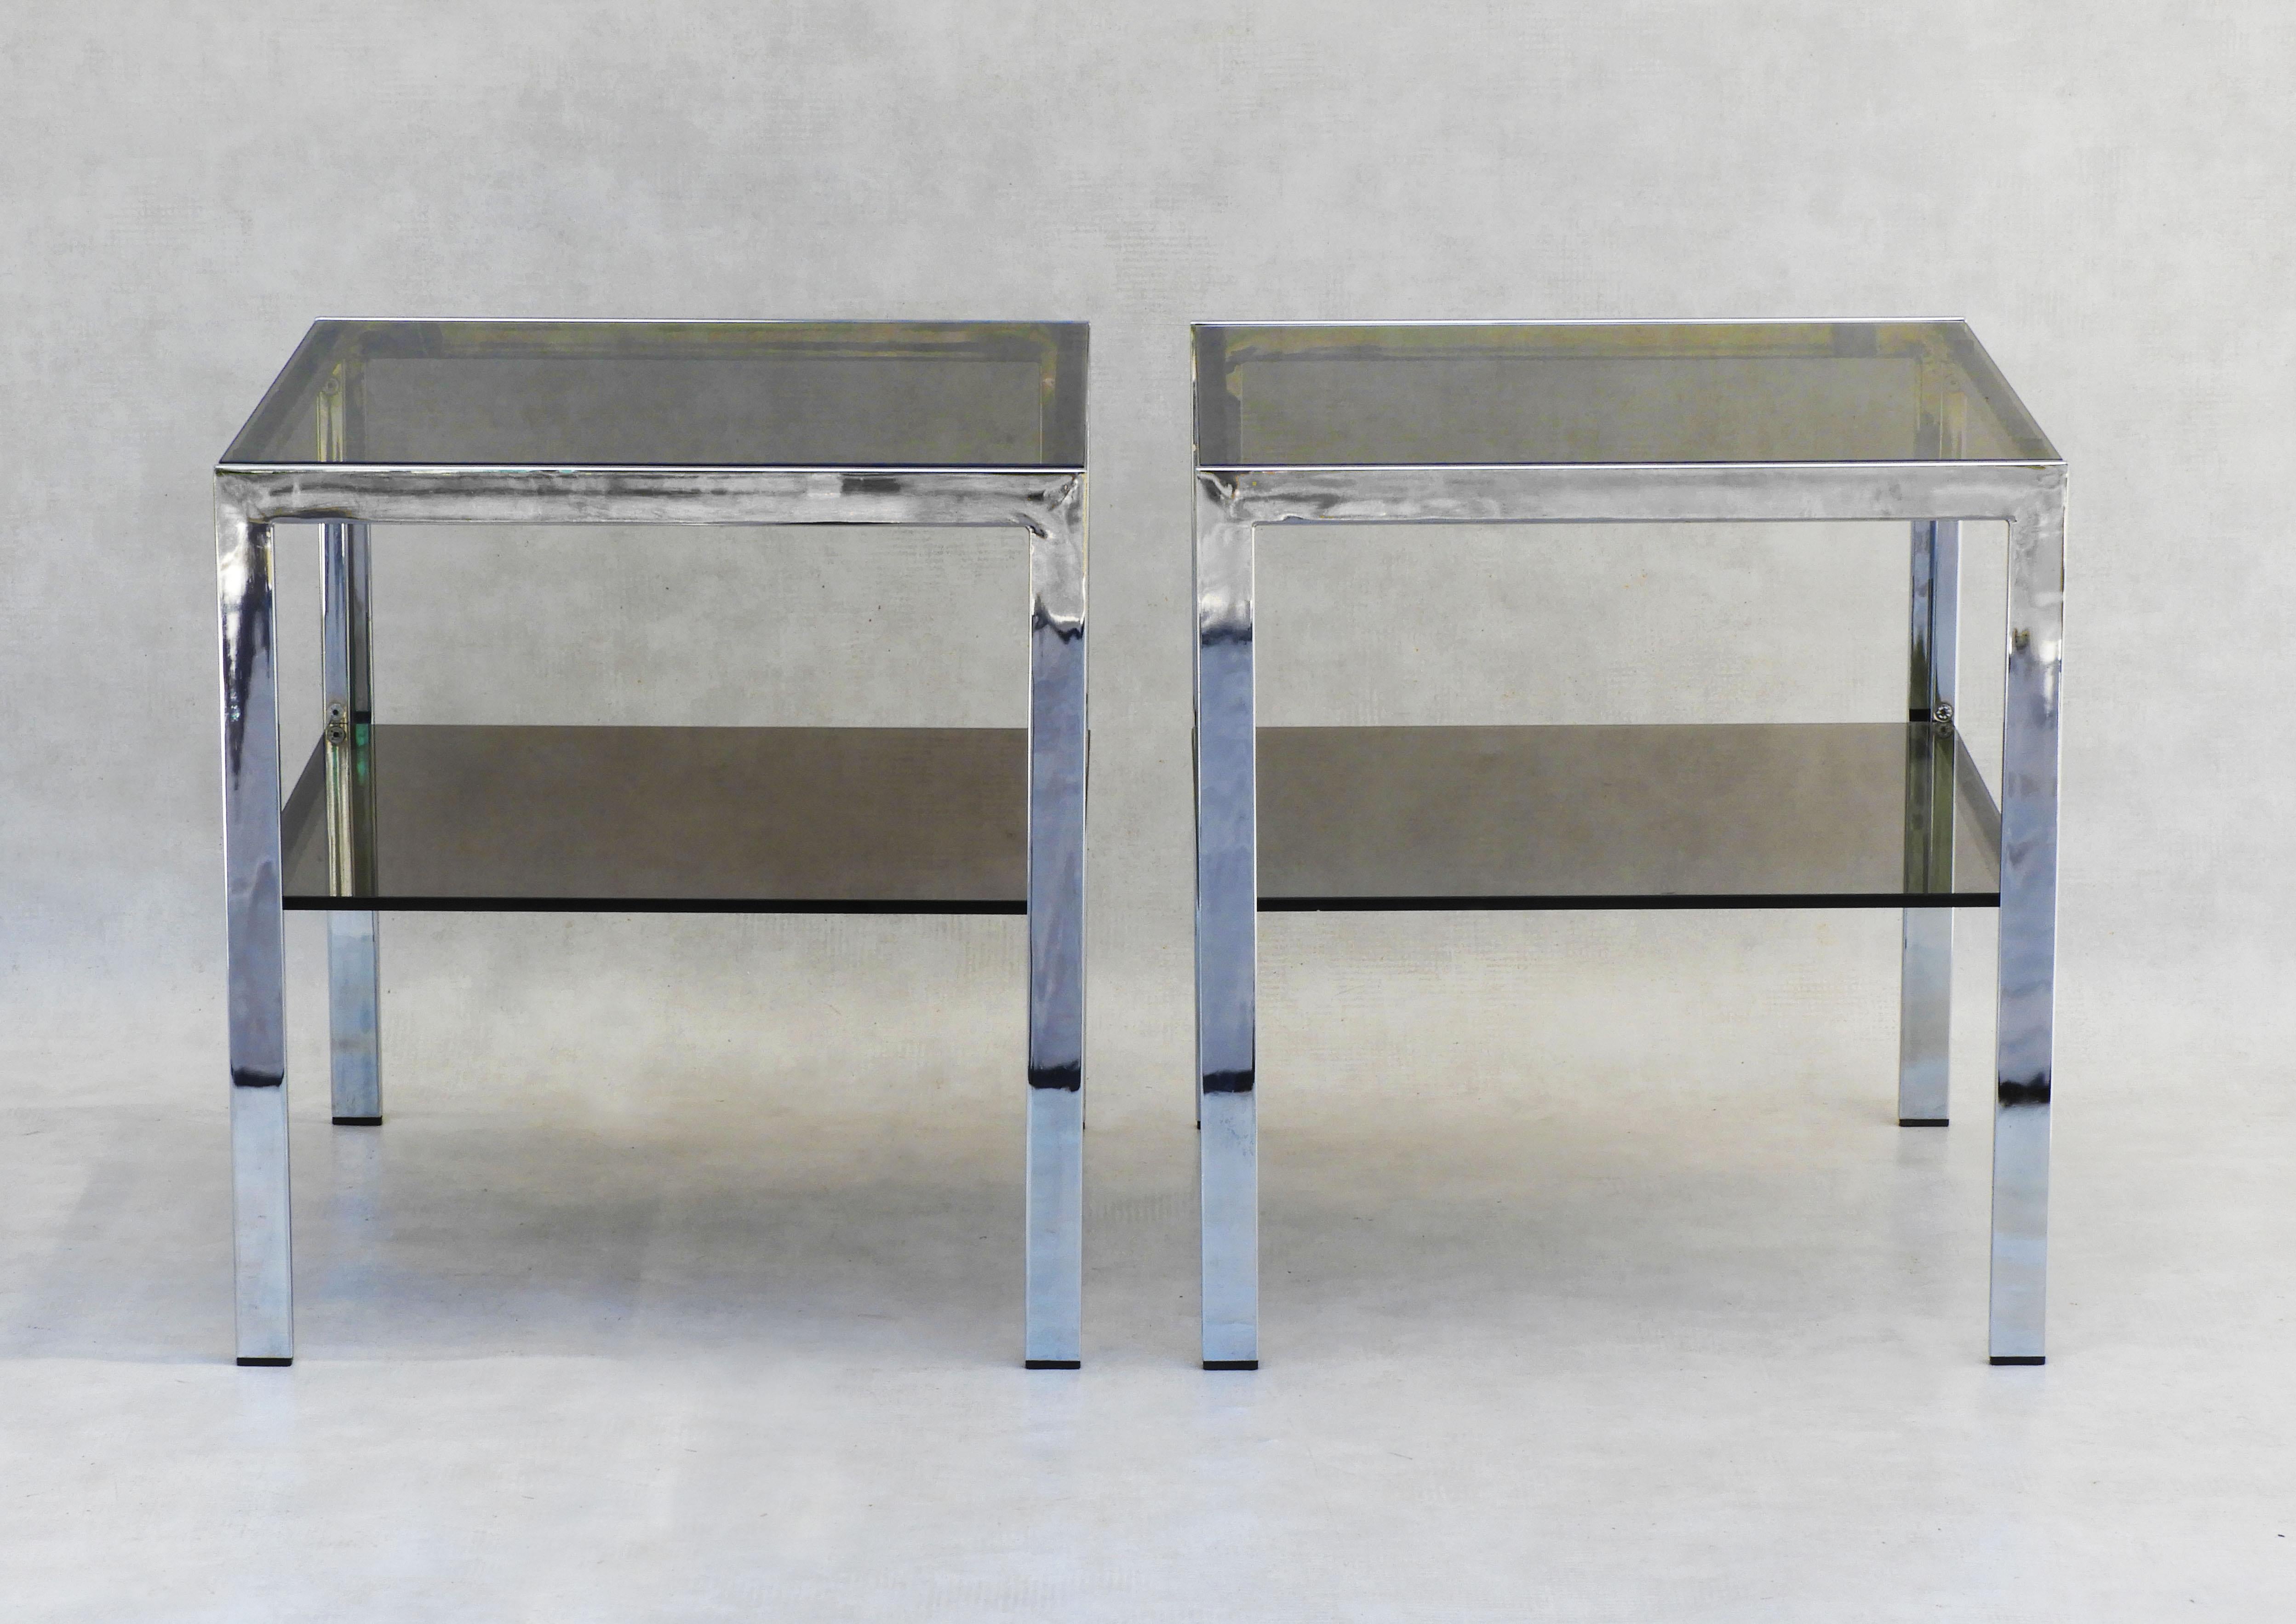 Vintage French Chrome and smoked glass side tables c1970.
A pair of stylish two tiered tables that can be placed as occasional tables, sofa end tables or nightstands.  Classic 70s French design with sleek simple lines that work well in a large array